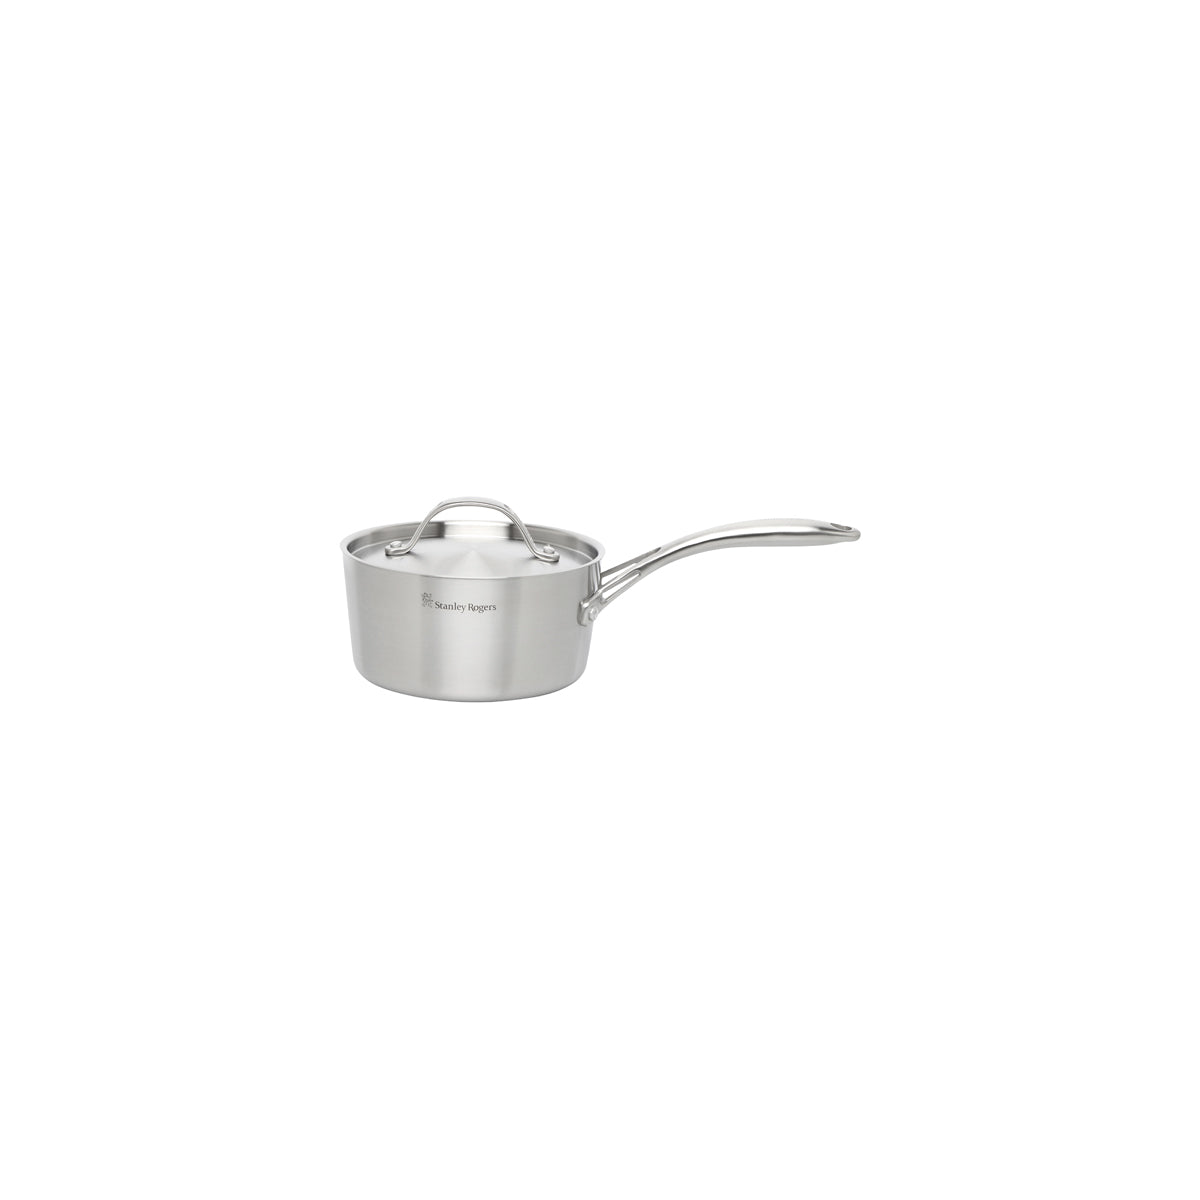 SR42284 Stanley Rogers Conical Tri Ply Saucepan 160mm Tomkin Australia Hospitality Supplies